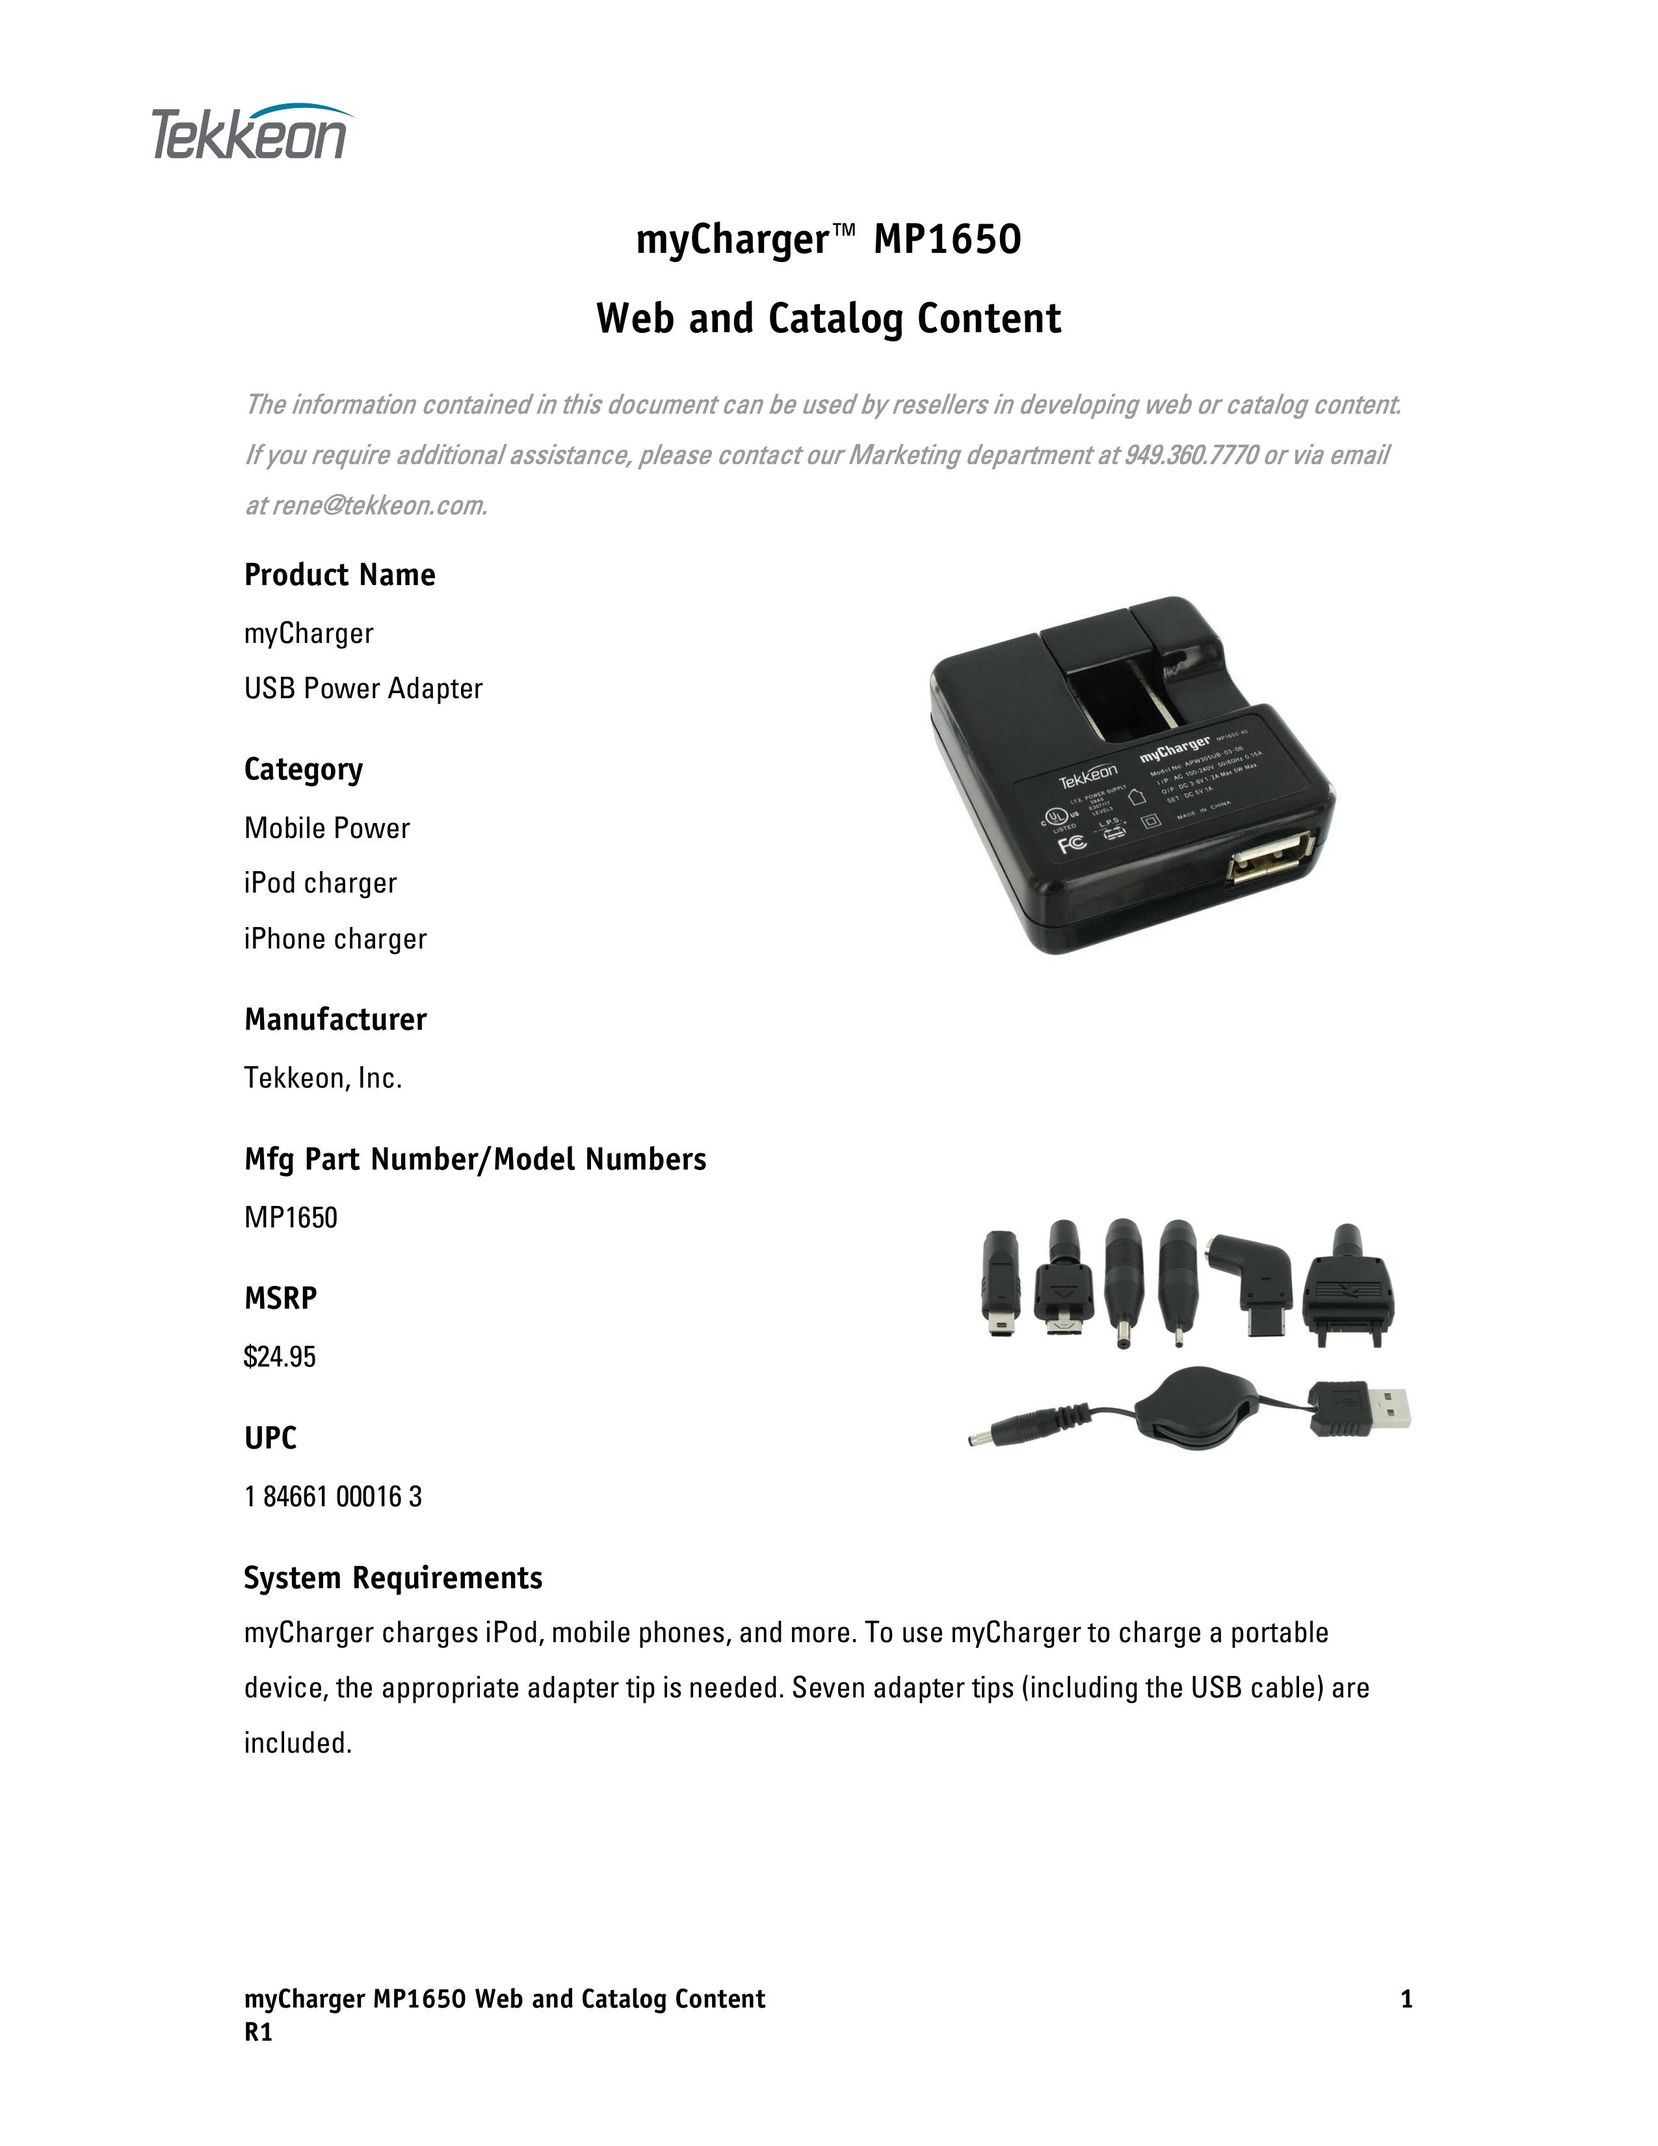 Tekkeon HX6732 Battery Charger User Manual